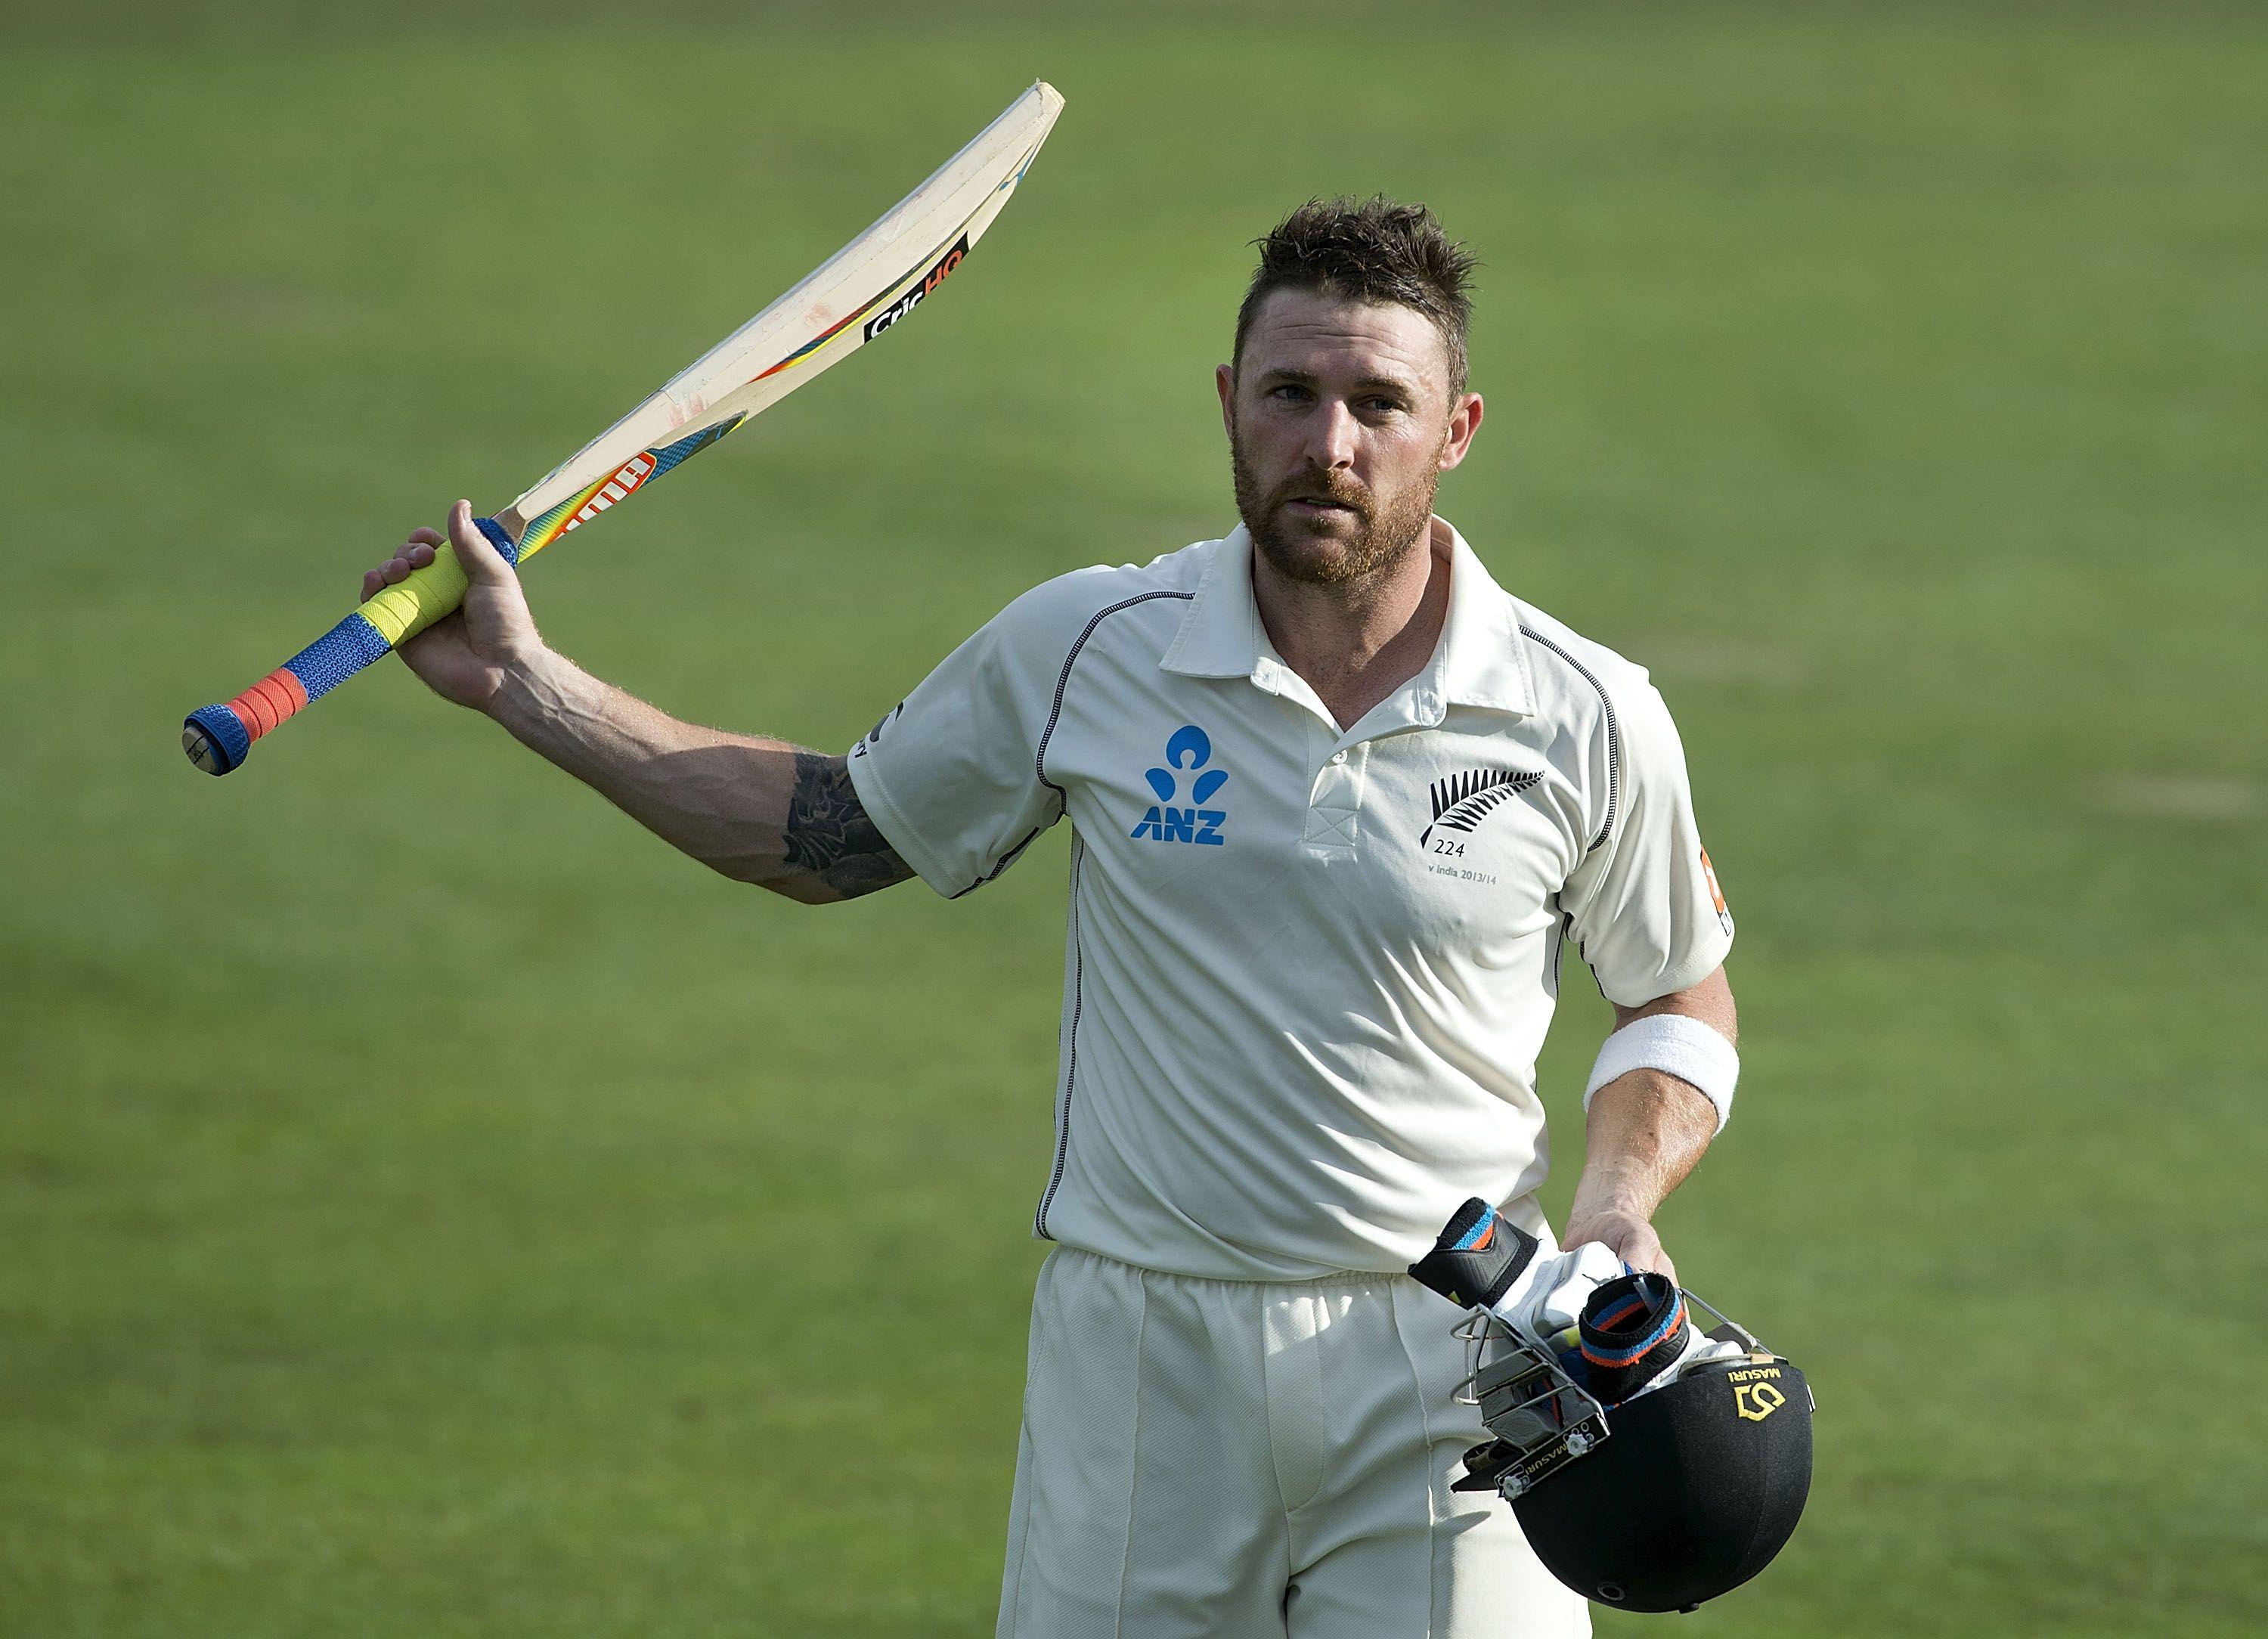 New Zealand's McCullum deflects praise after stunning double hundred